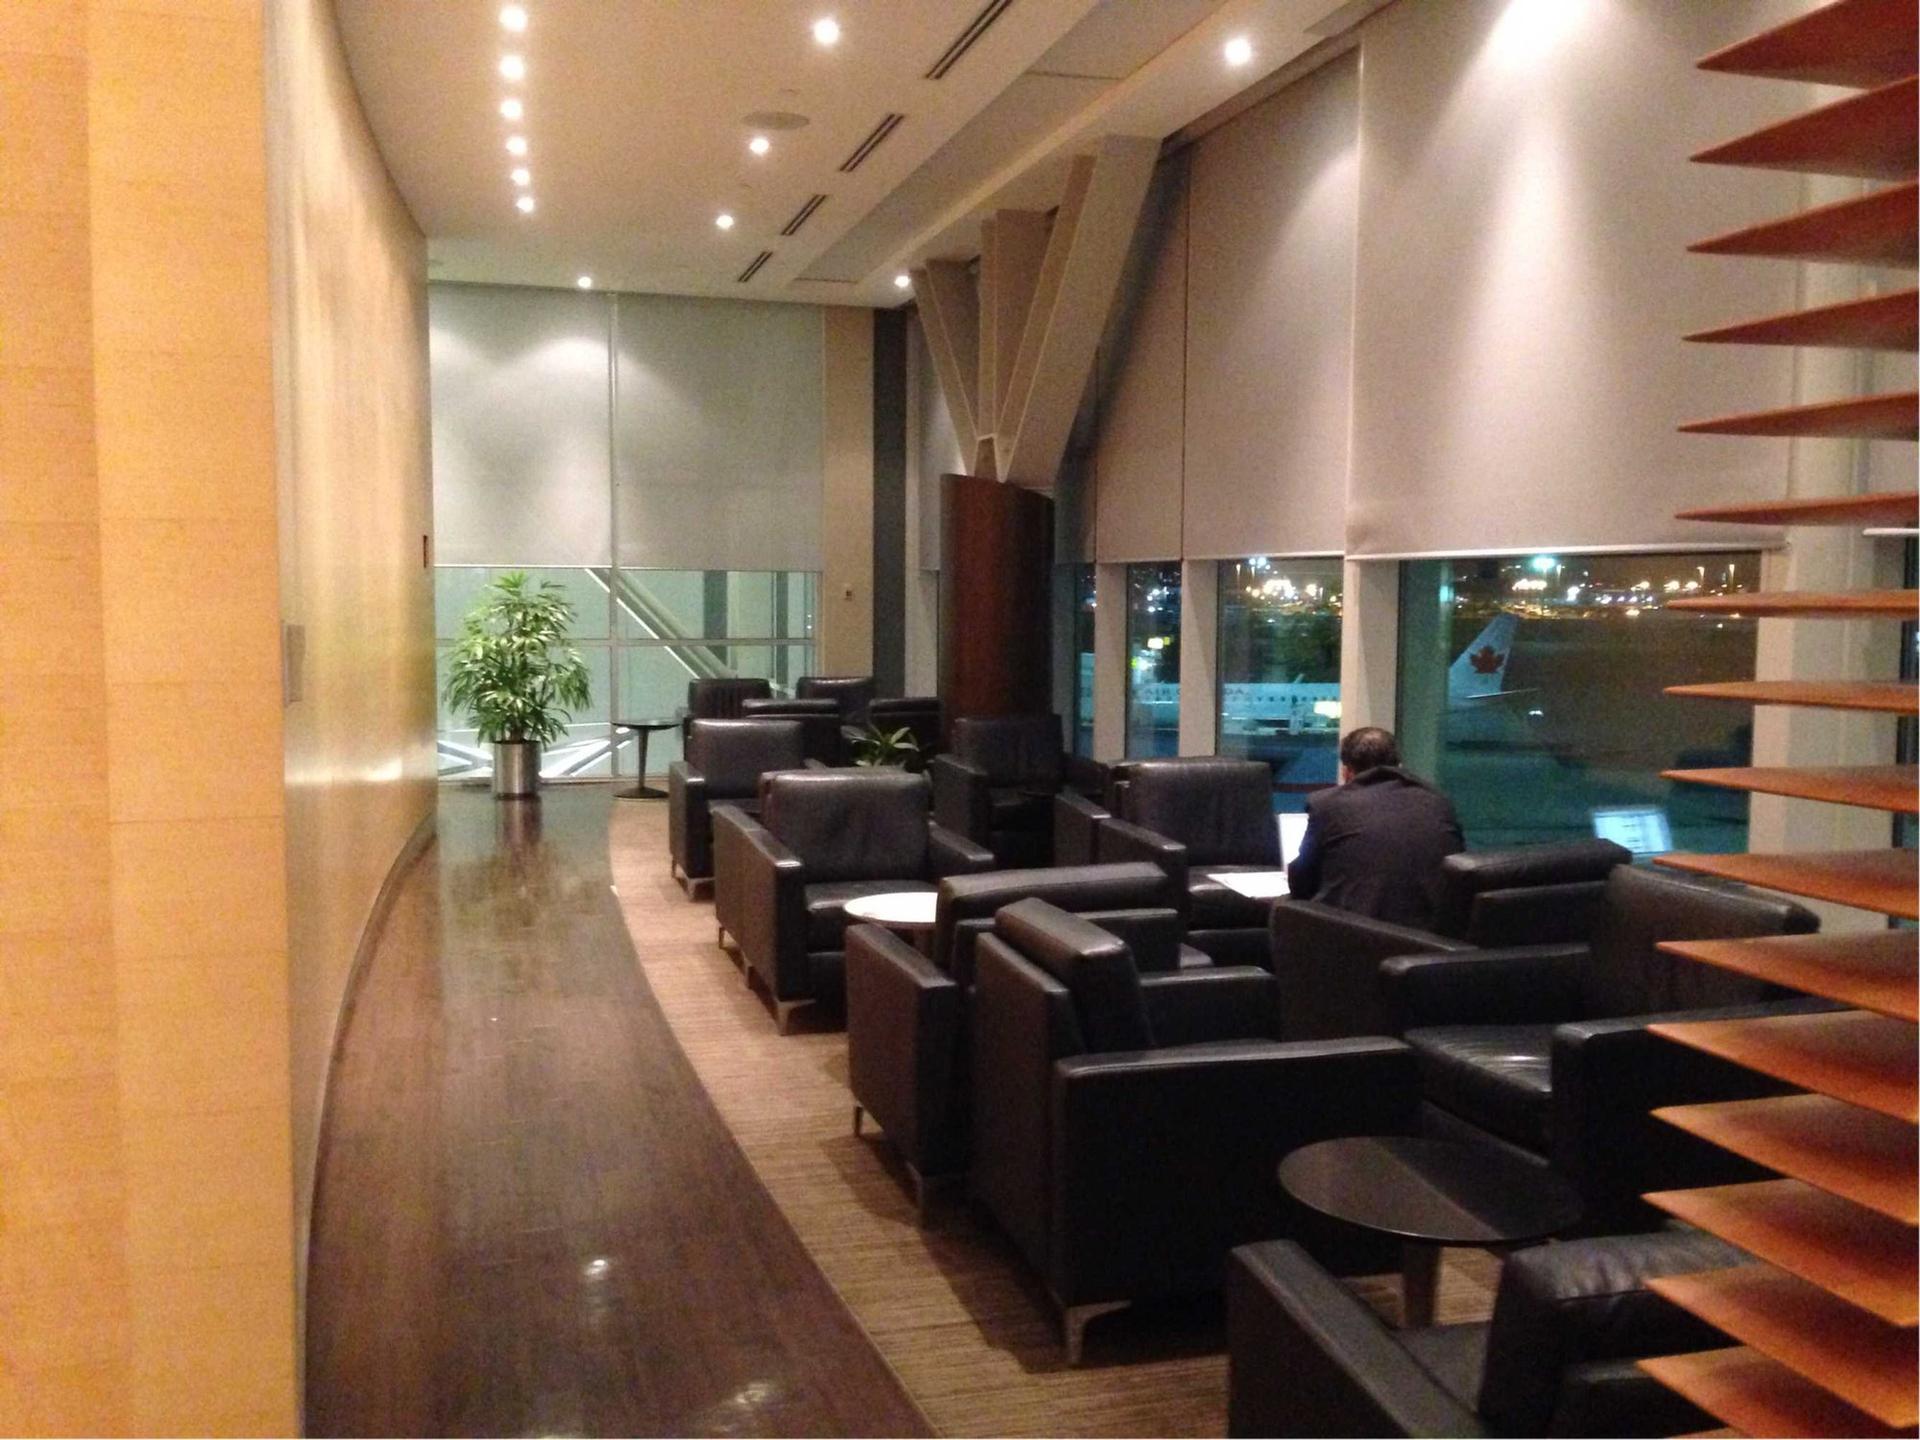 Air Canada Maple Leaf Lounge image 7 of 17